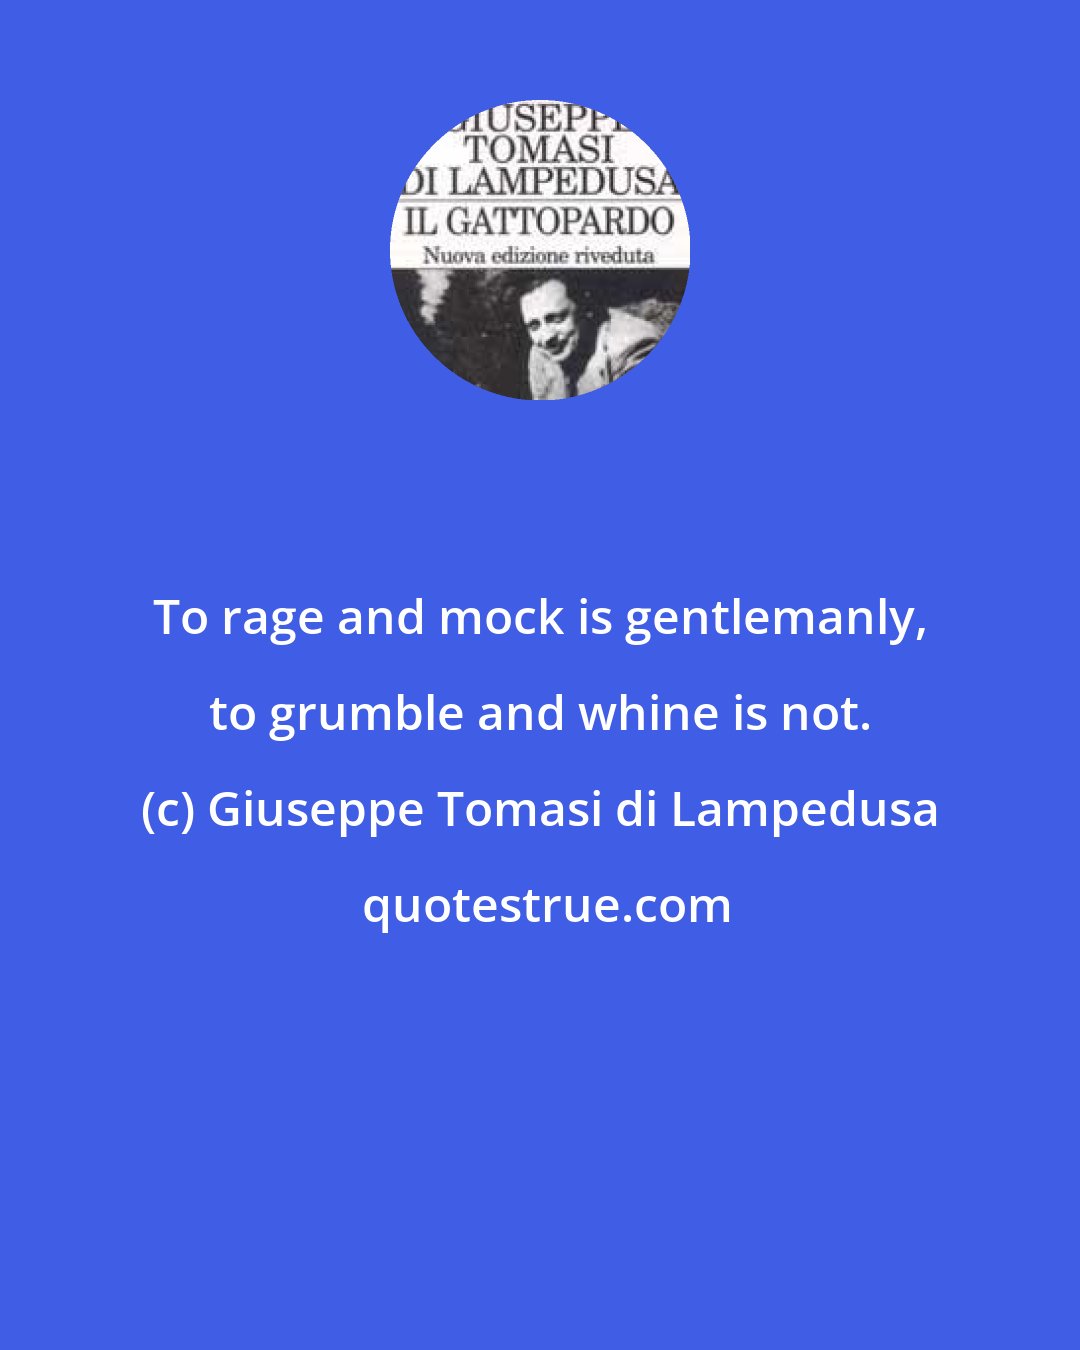 Giuseppe Tomasi di Lampedusa: To rage and mock is gentlemanly, to grumble and whine is not.